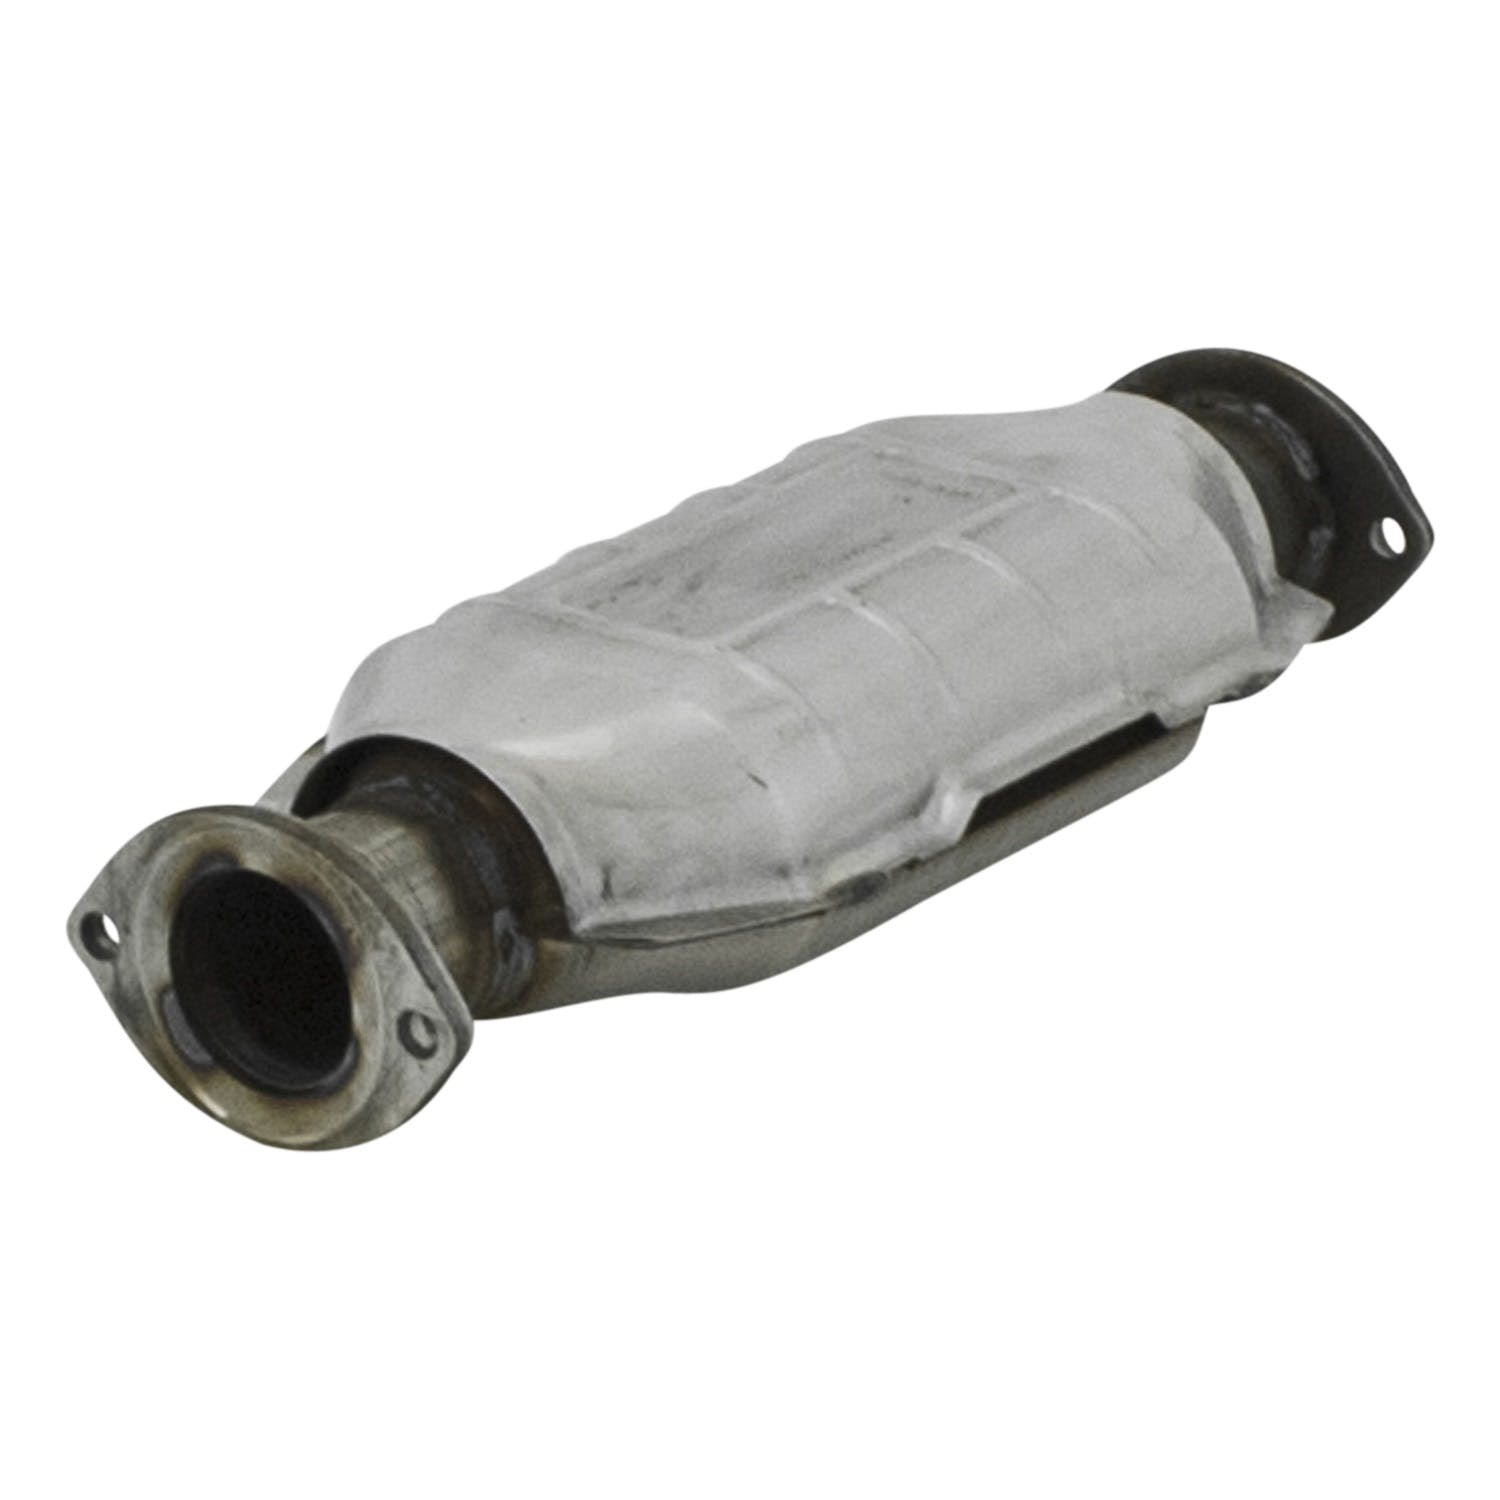 Flowmaster Catalytic Converters 2050003 Catalytic Converter-Direct Fit-2.25 in Inlet/Outlet-49 State